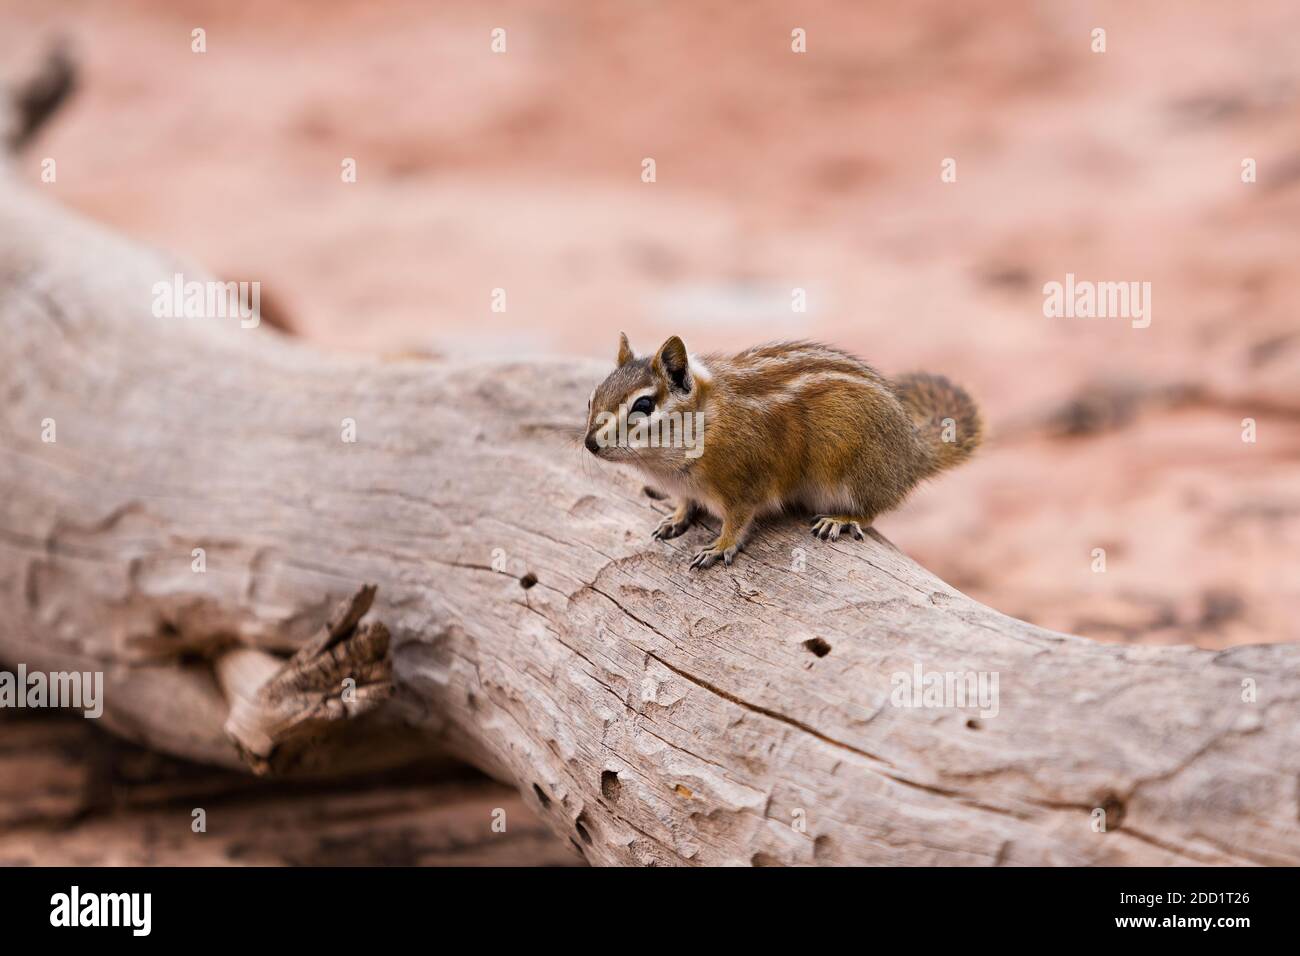 A Hopi Chipmunk, Neotamias rufus, in Dead Horse Point State Park near Moab, Utah. Stock Photo